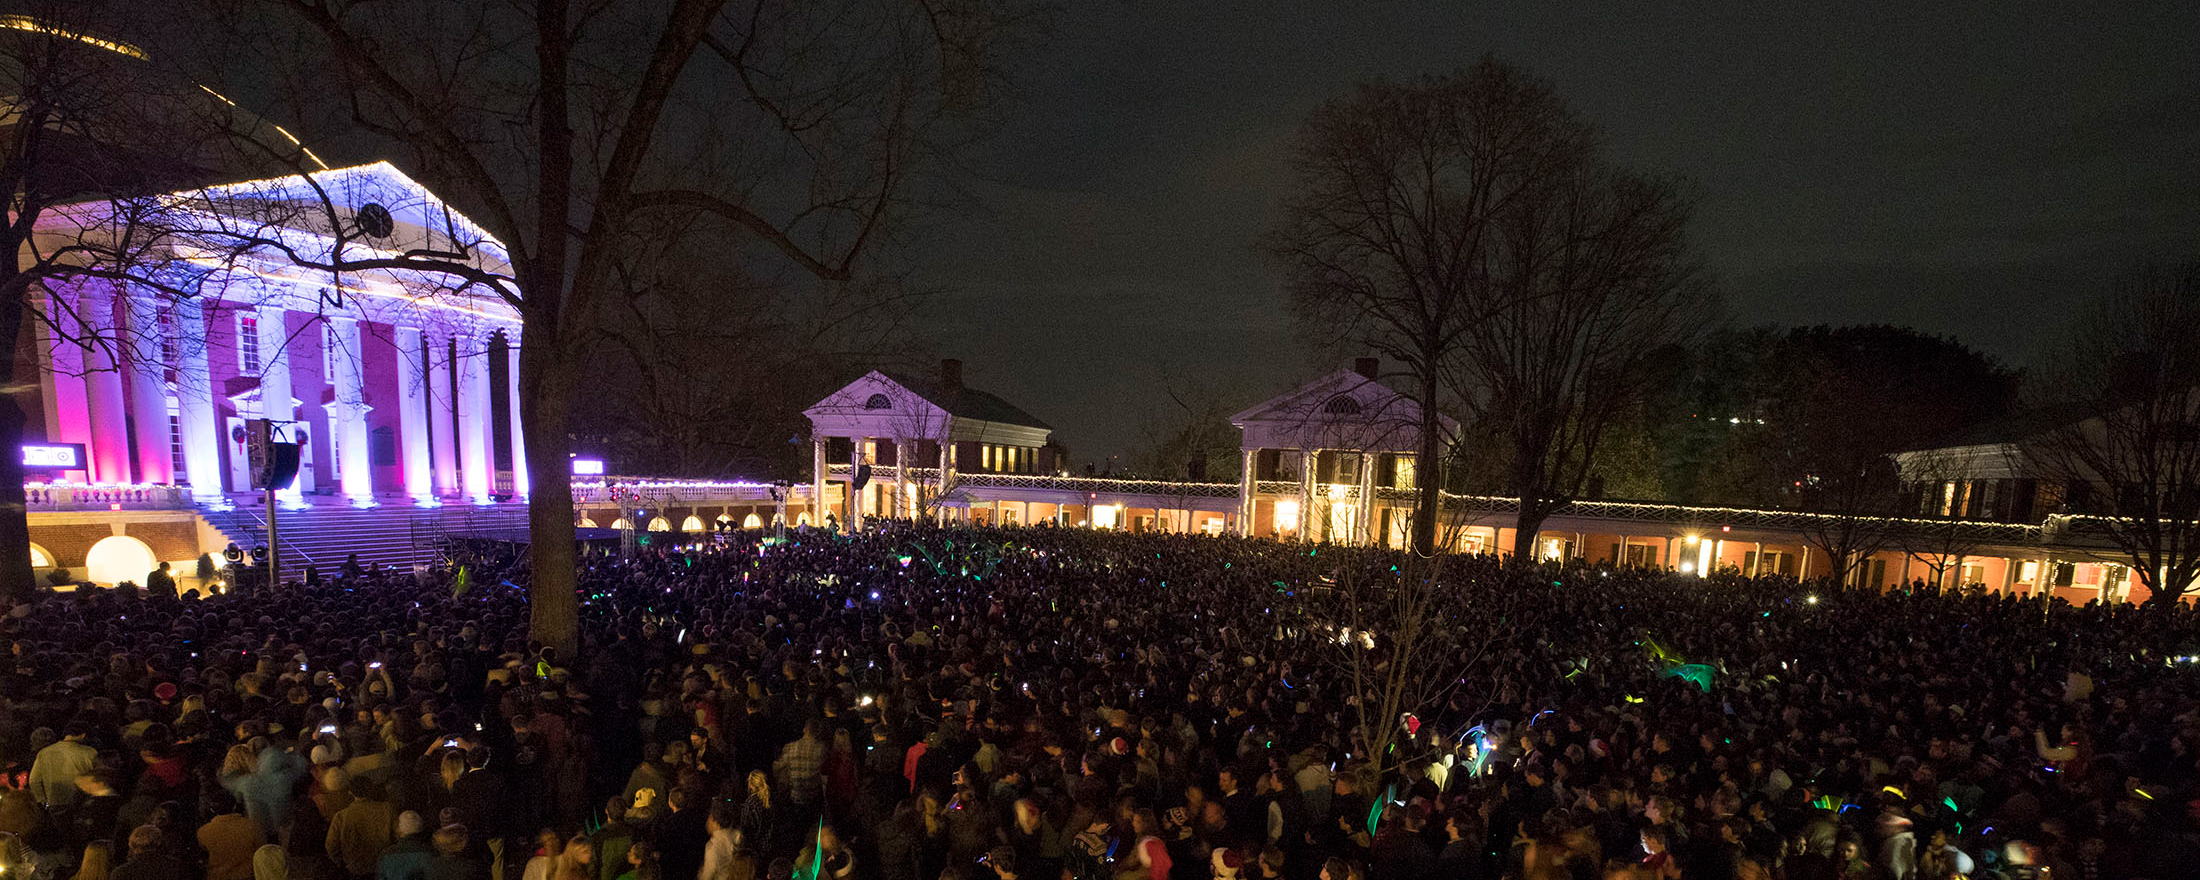 Crowd on the lawn with lights for the Lighting of the Lawn event